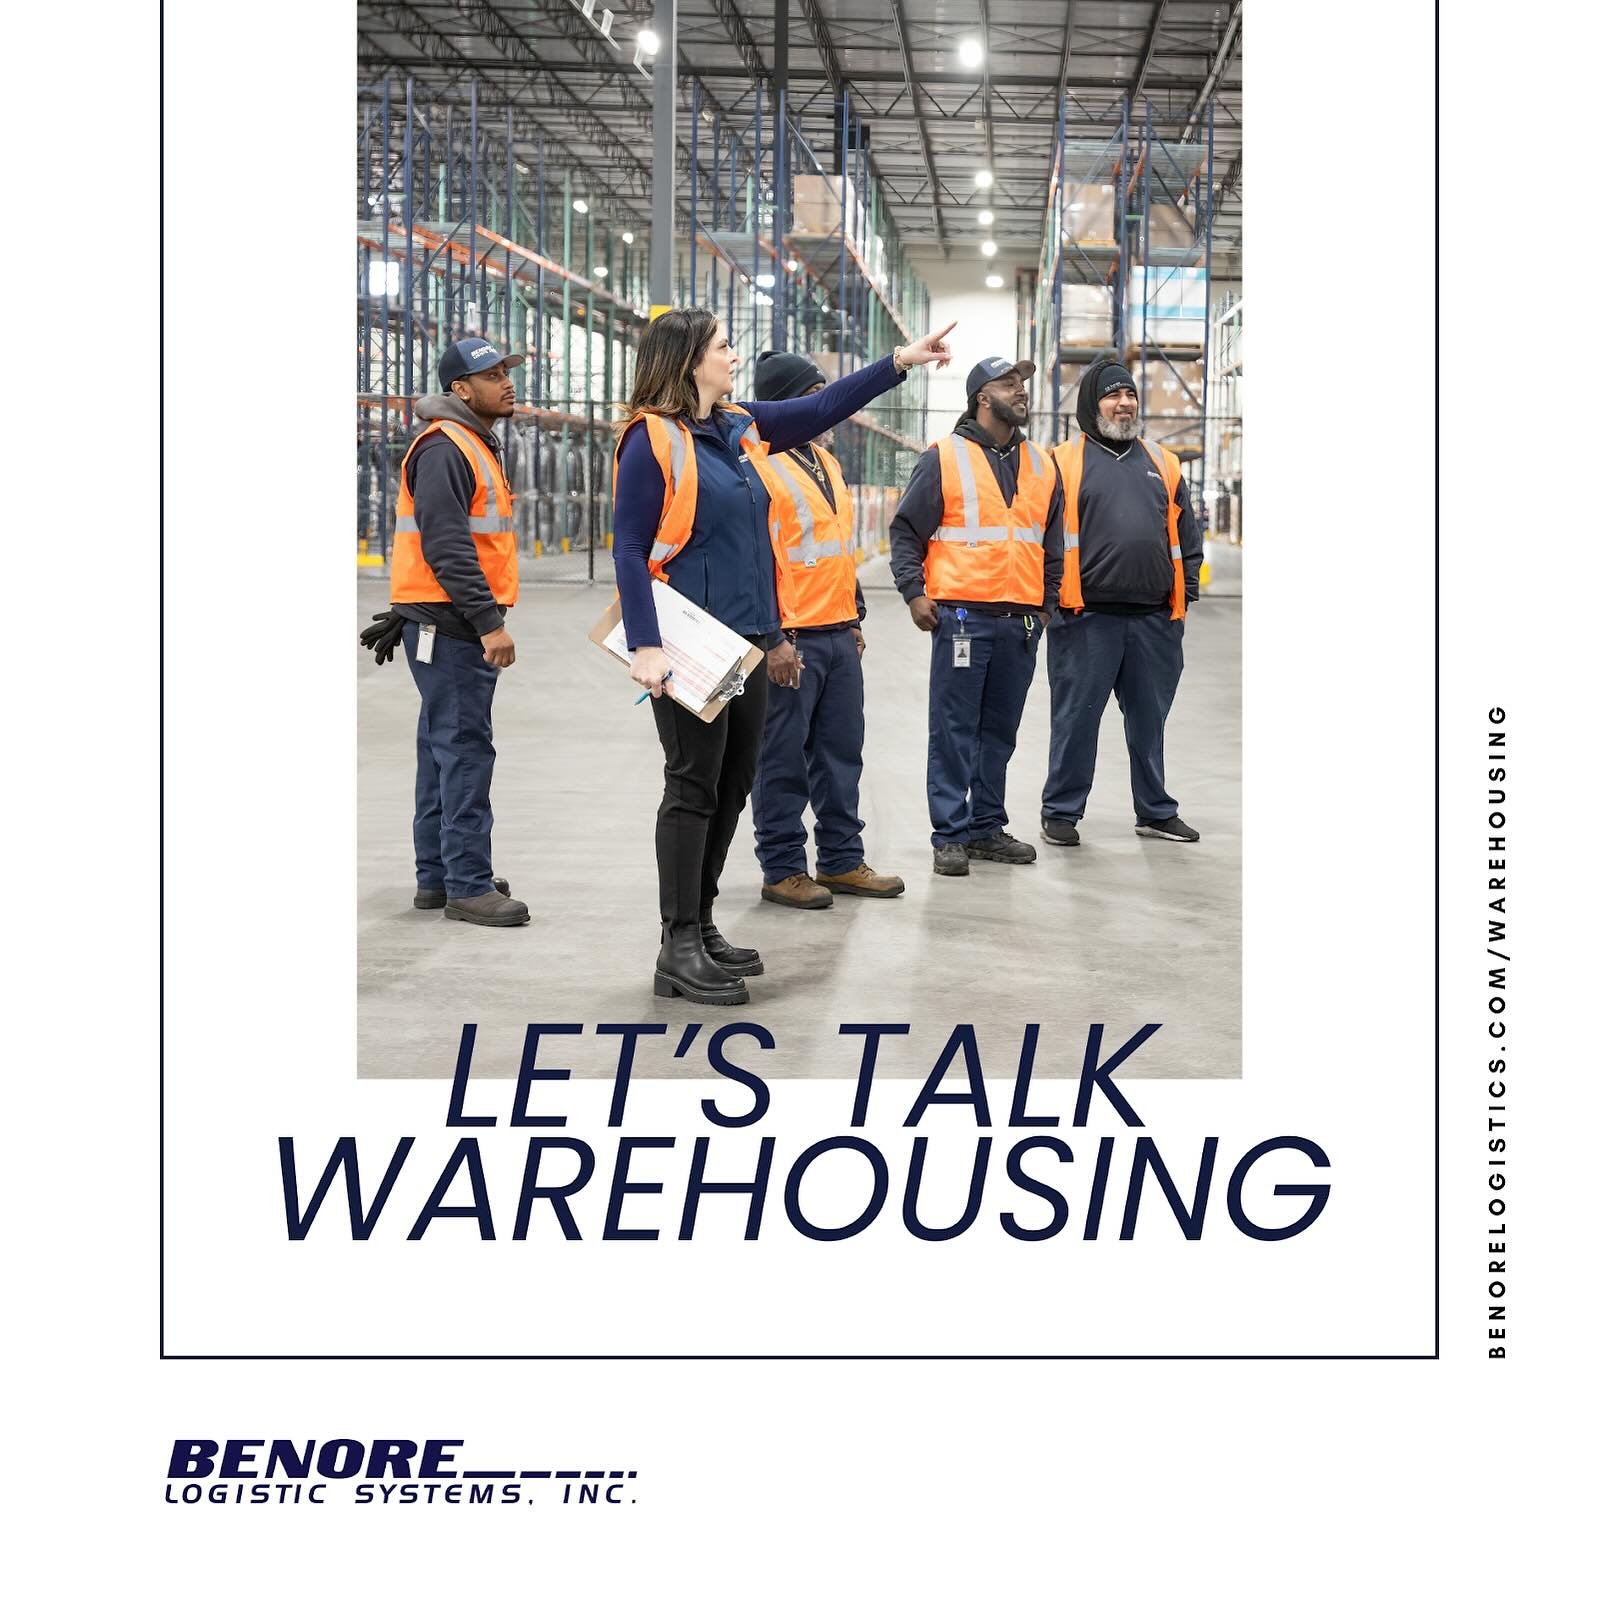 Let&rsquo;s talk warehousing!

Benore Logistic Systems, Inc. offers a suite of services tailored to your needs:

&bull; Transload
&bull; Picking/Packing/Repacking
&bull; Cross-Dock
&bull; Short &amp; Long-Term Storage
&bull; Inventory Management
&bul